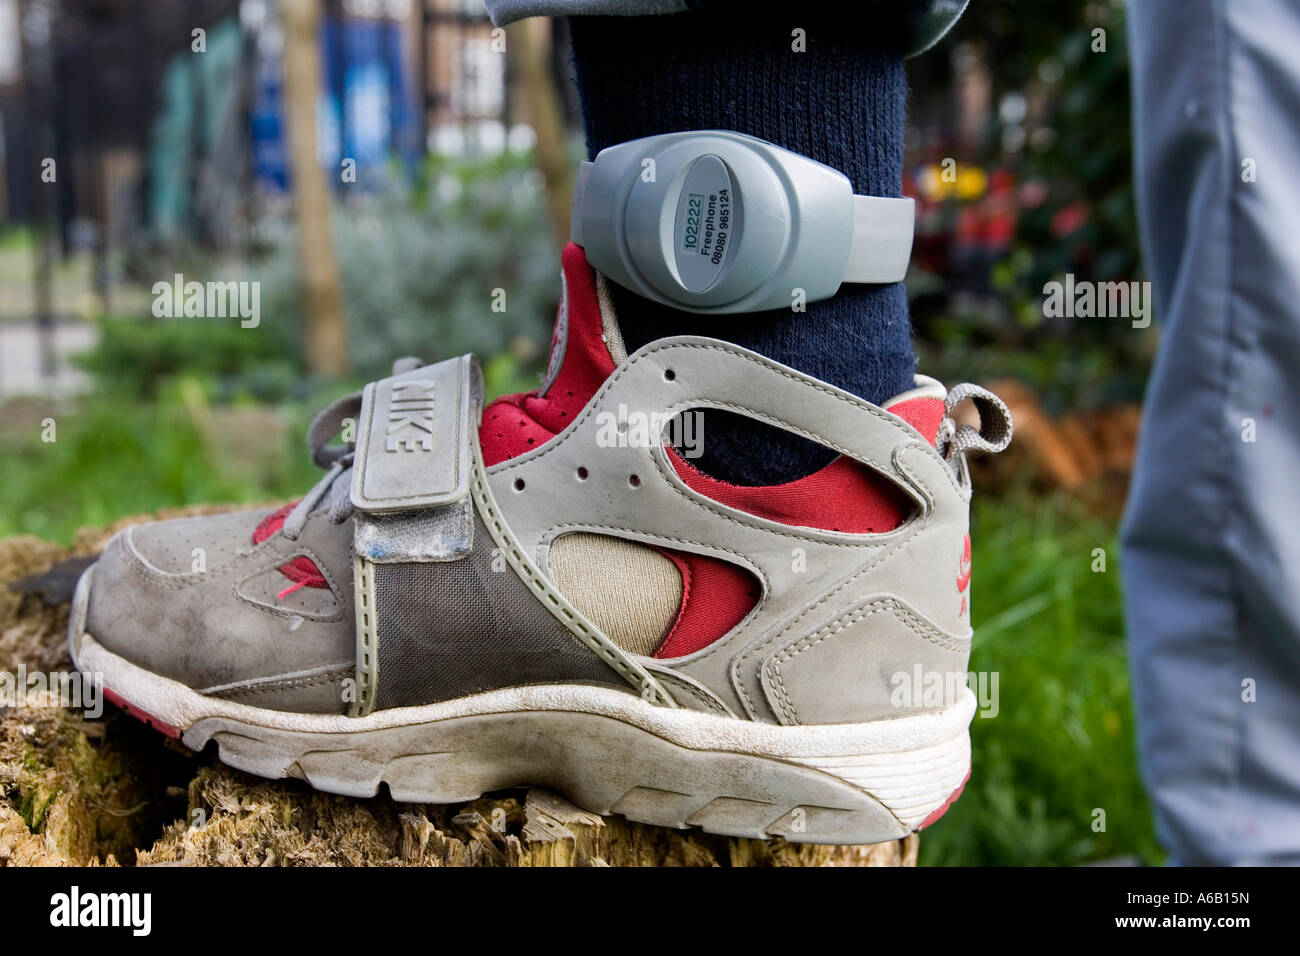 Electronic tag applied to a young offender ankle London England Britain UK Stock Photo